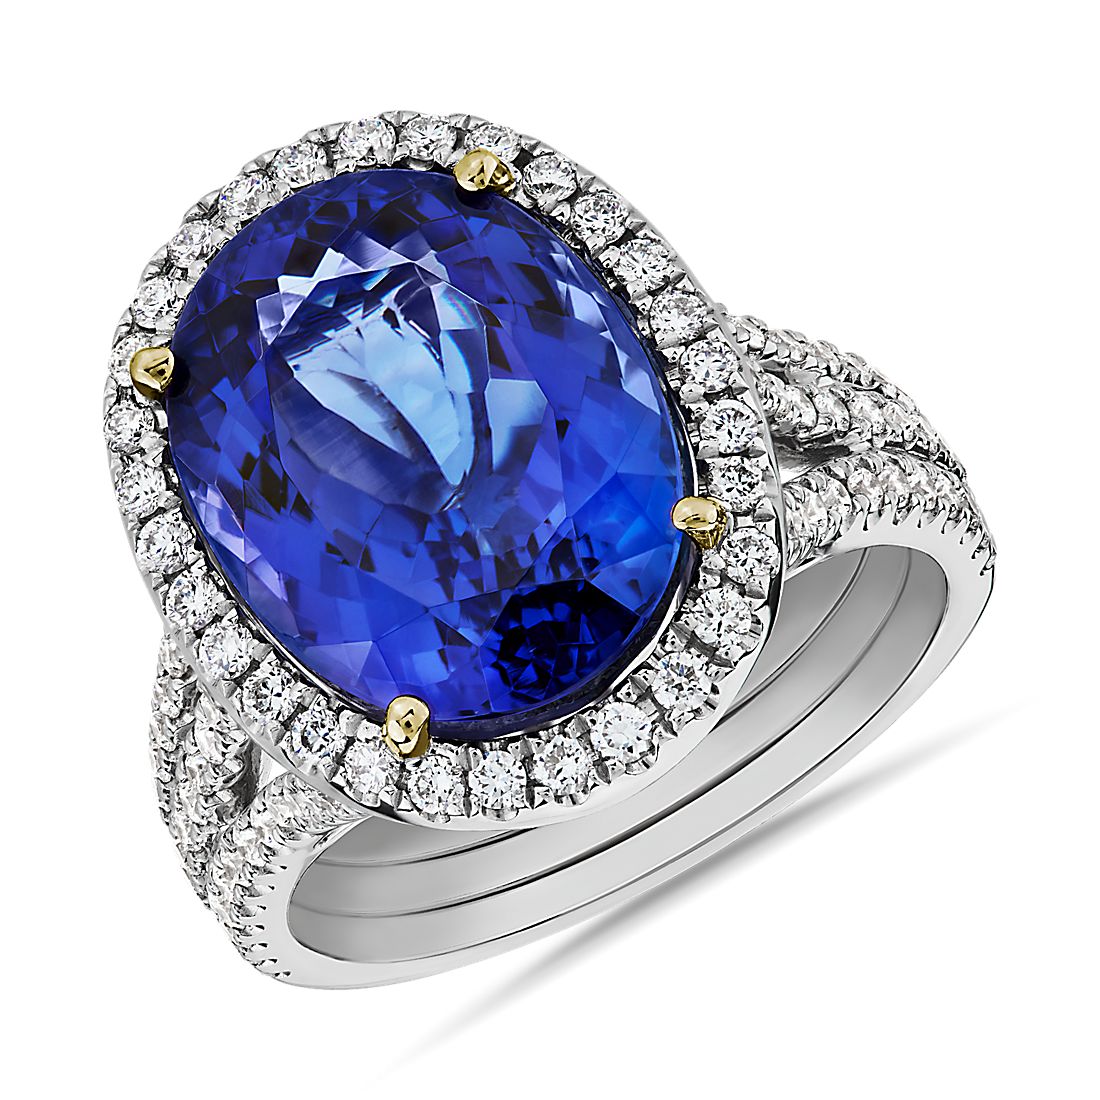 Oval Tanzanite and Diamond Ring in 18k White Gold